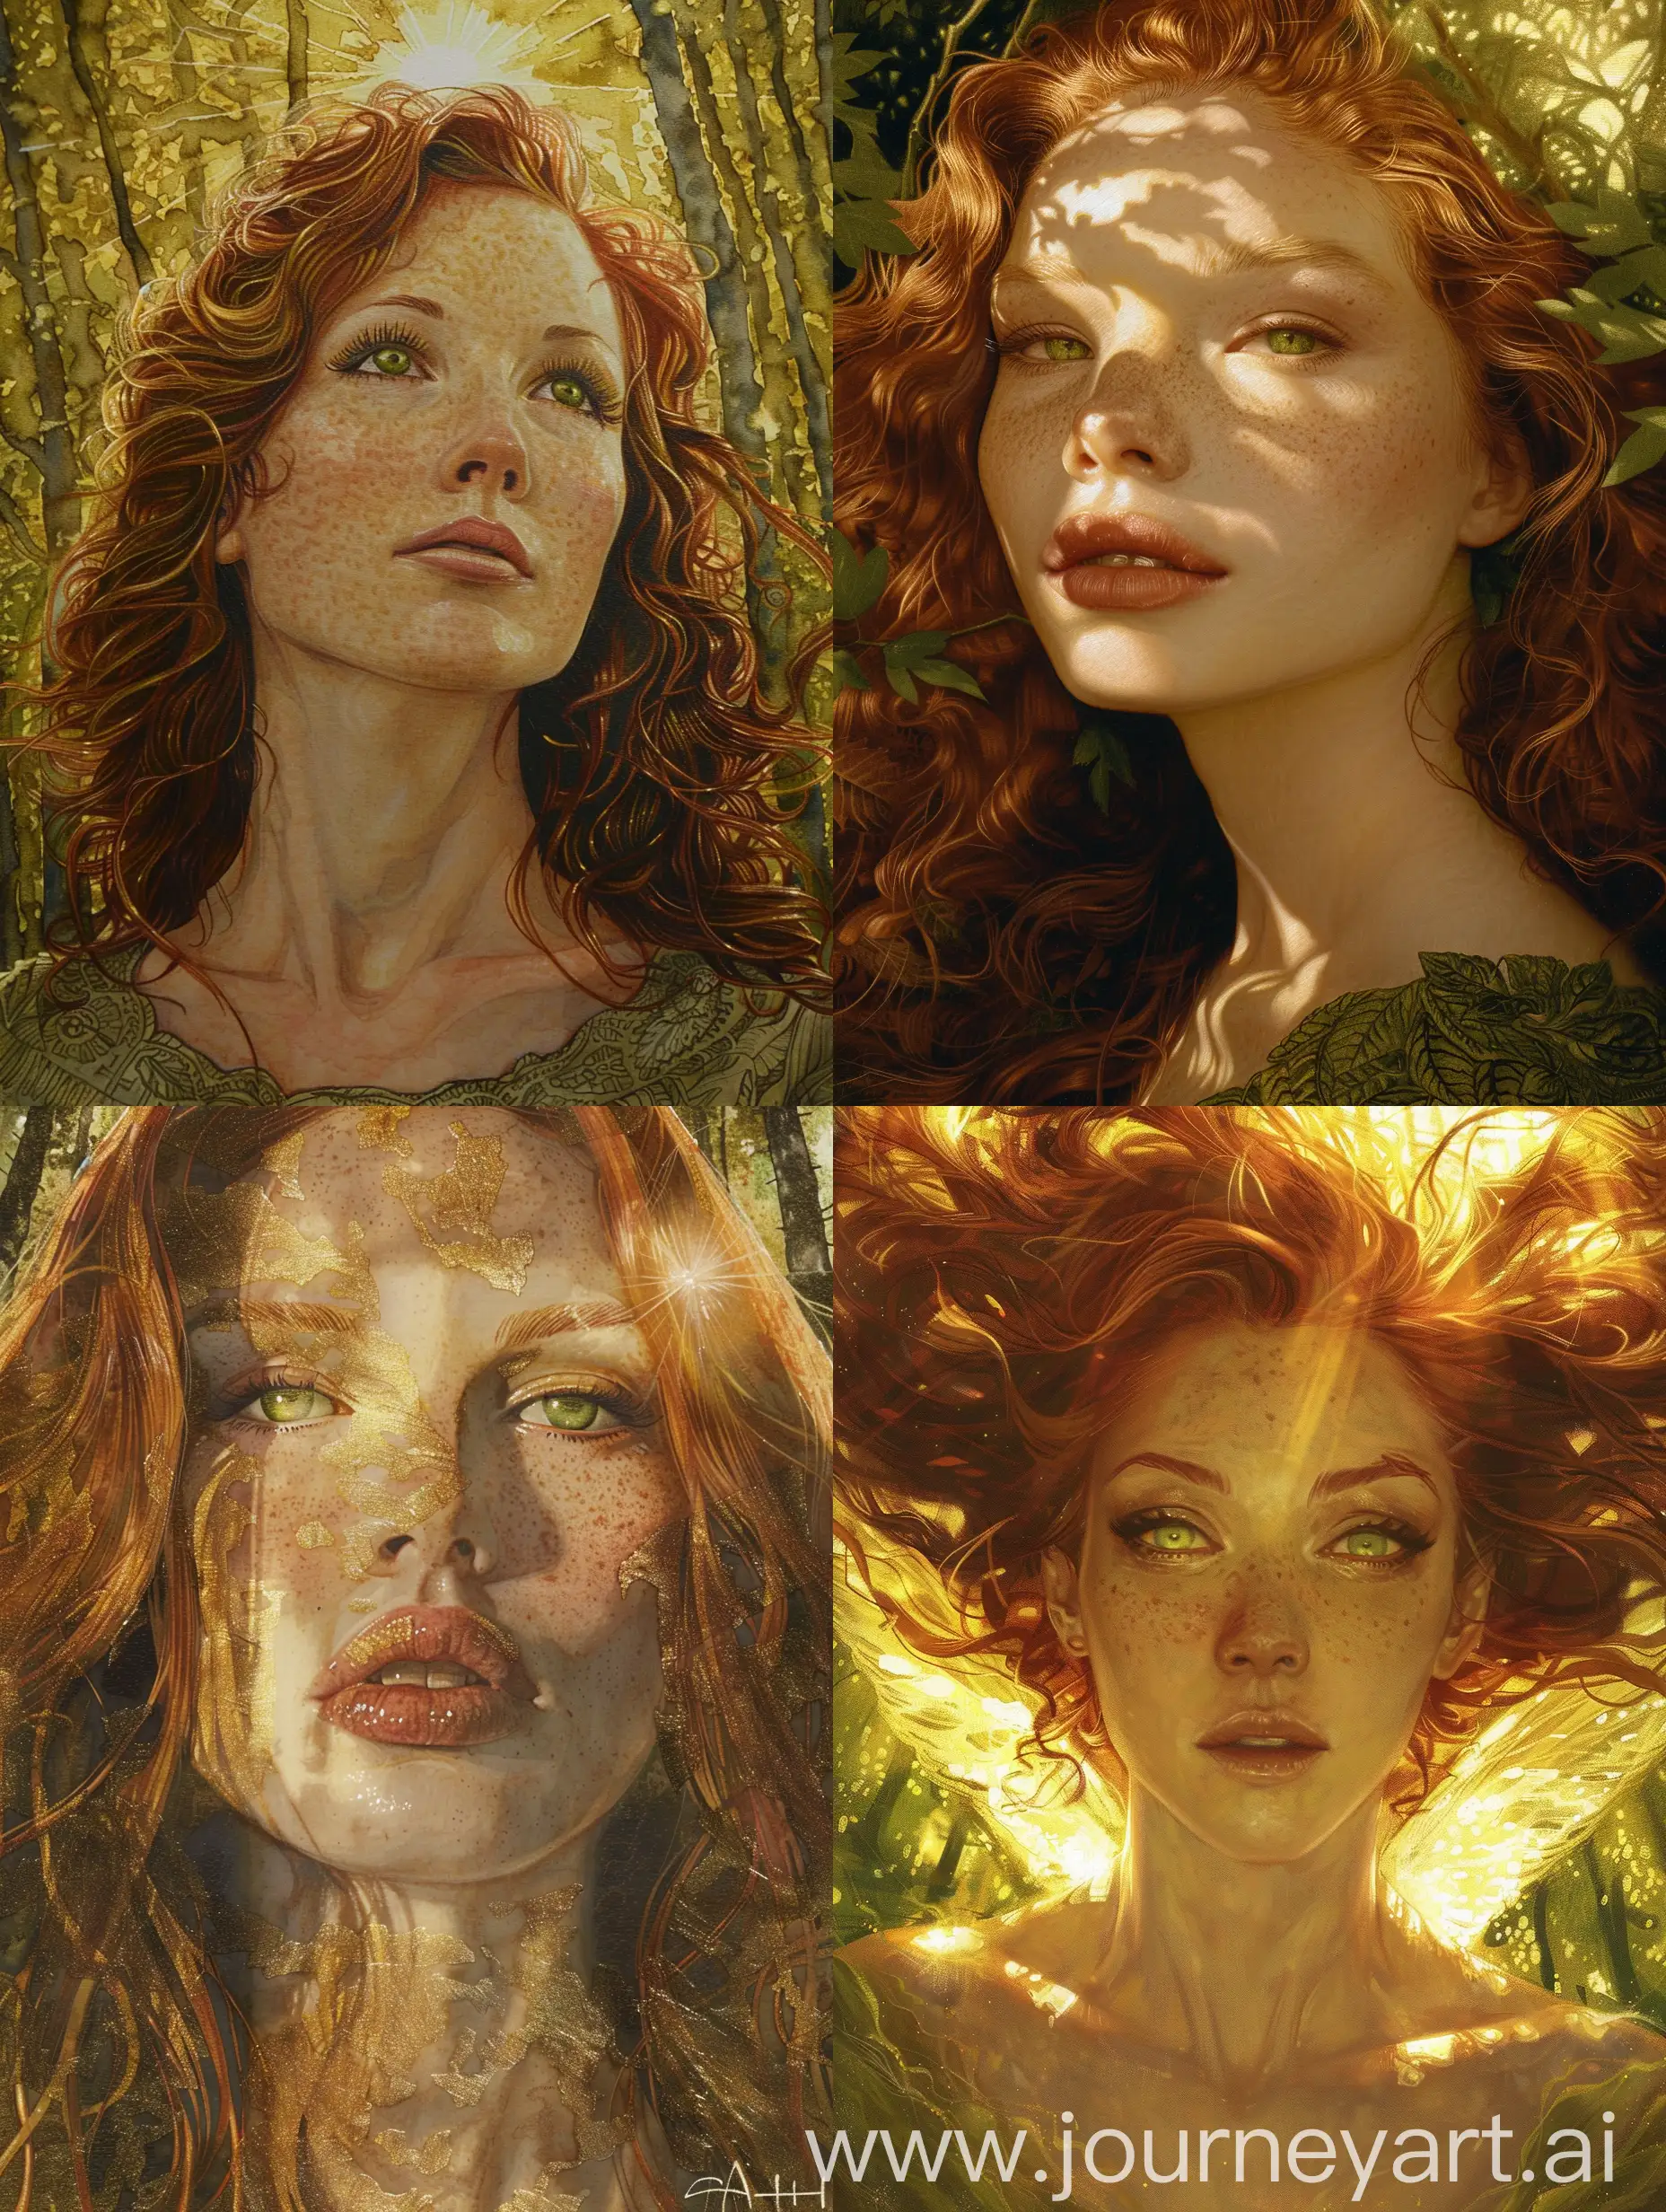 Subject: a supernatural goddess. Olive earthy toned skin, well toned and ample curves, a face even more beautiful than the sunshine on a warm summer morning, emerald green eyes, apple red hair.   

Background: surrounded by warm forests and sunshine.   

Style: detailed paiting by gaston bussiere, craig mullins, Impressionism, impasto, baroque, impressionist, mythological oil painting watercolor painting.